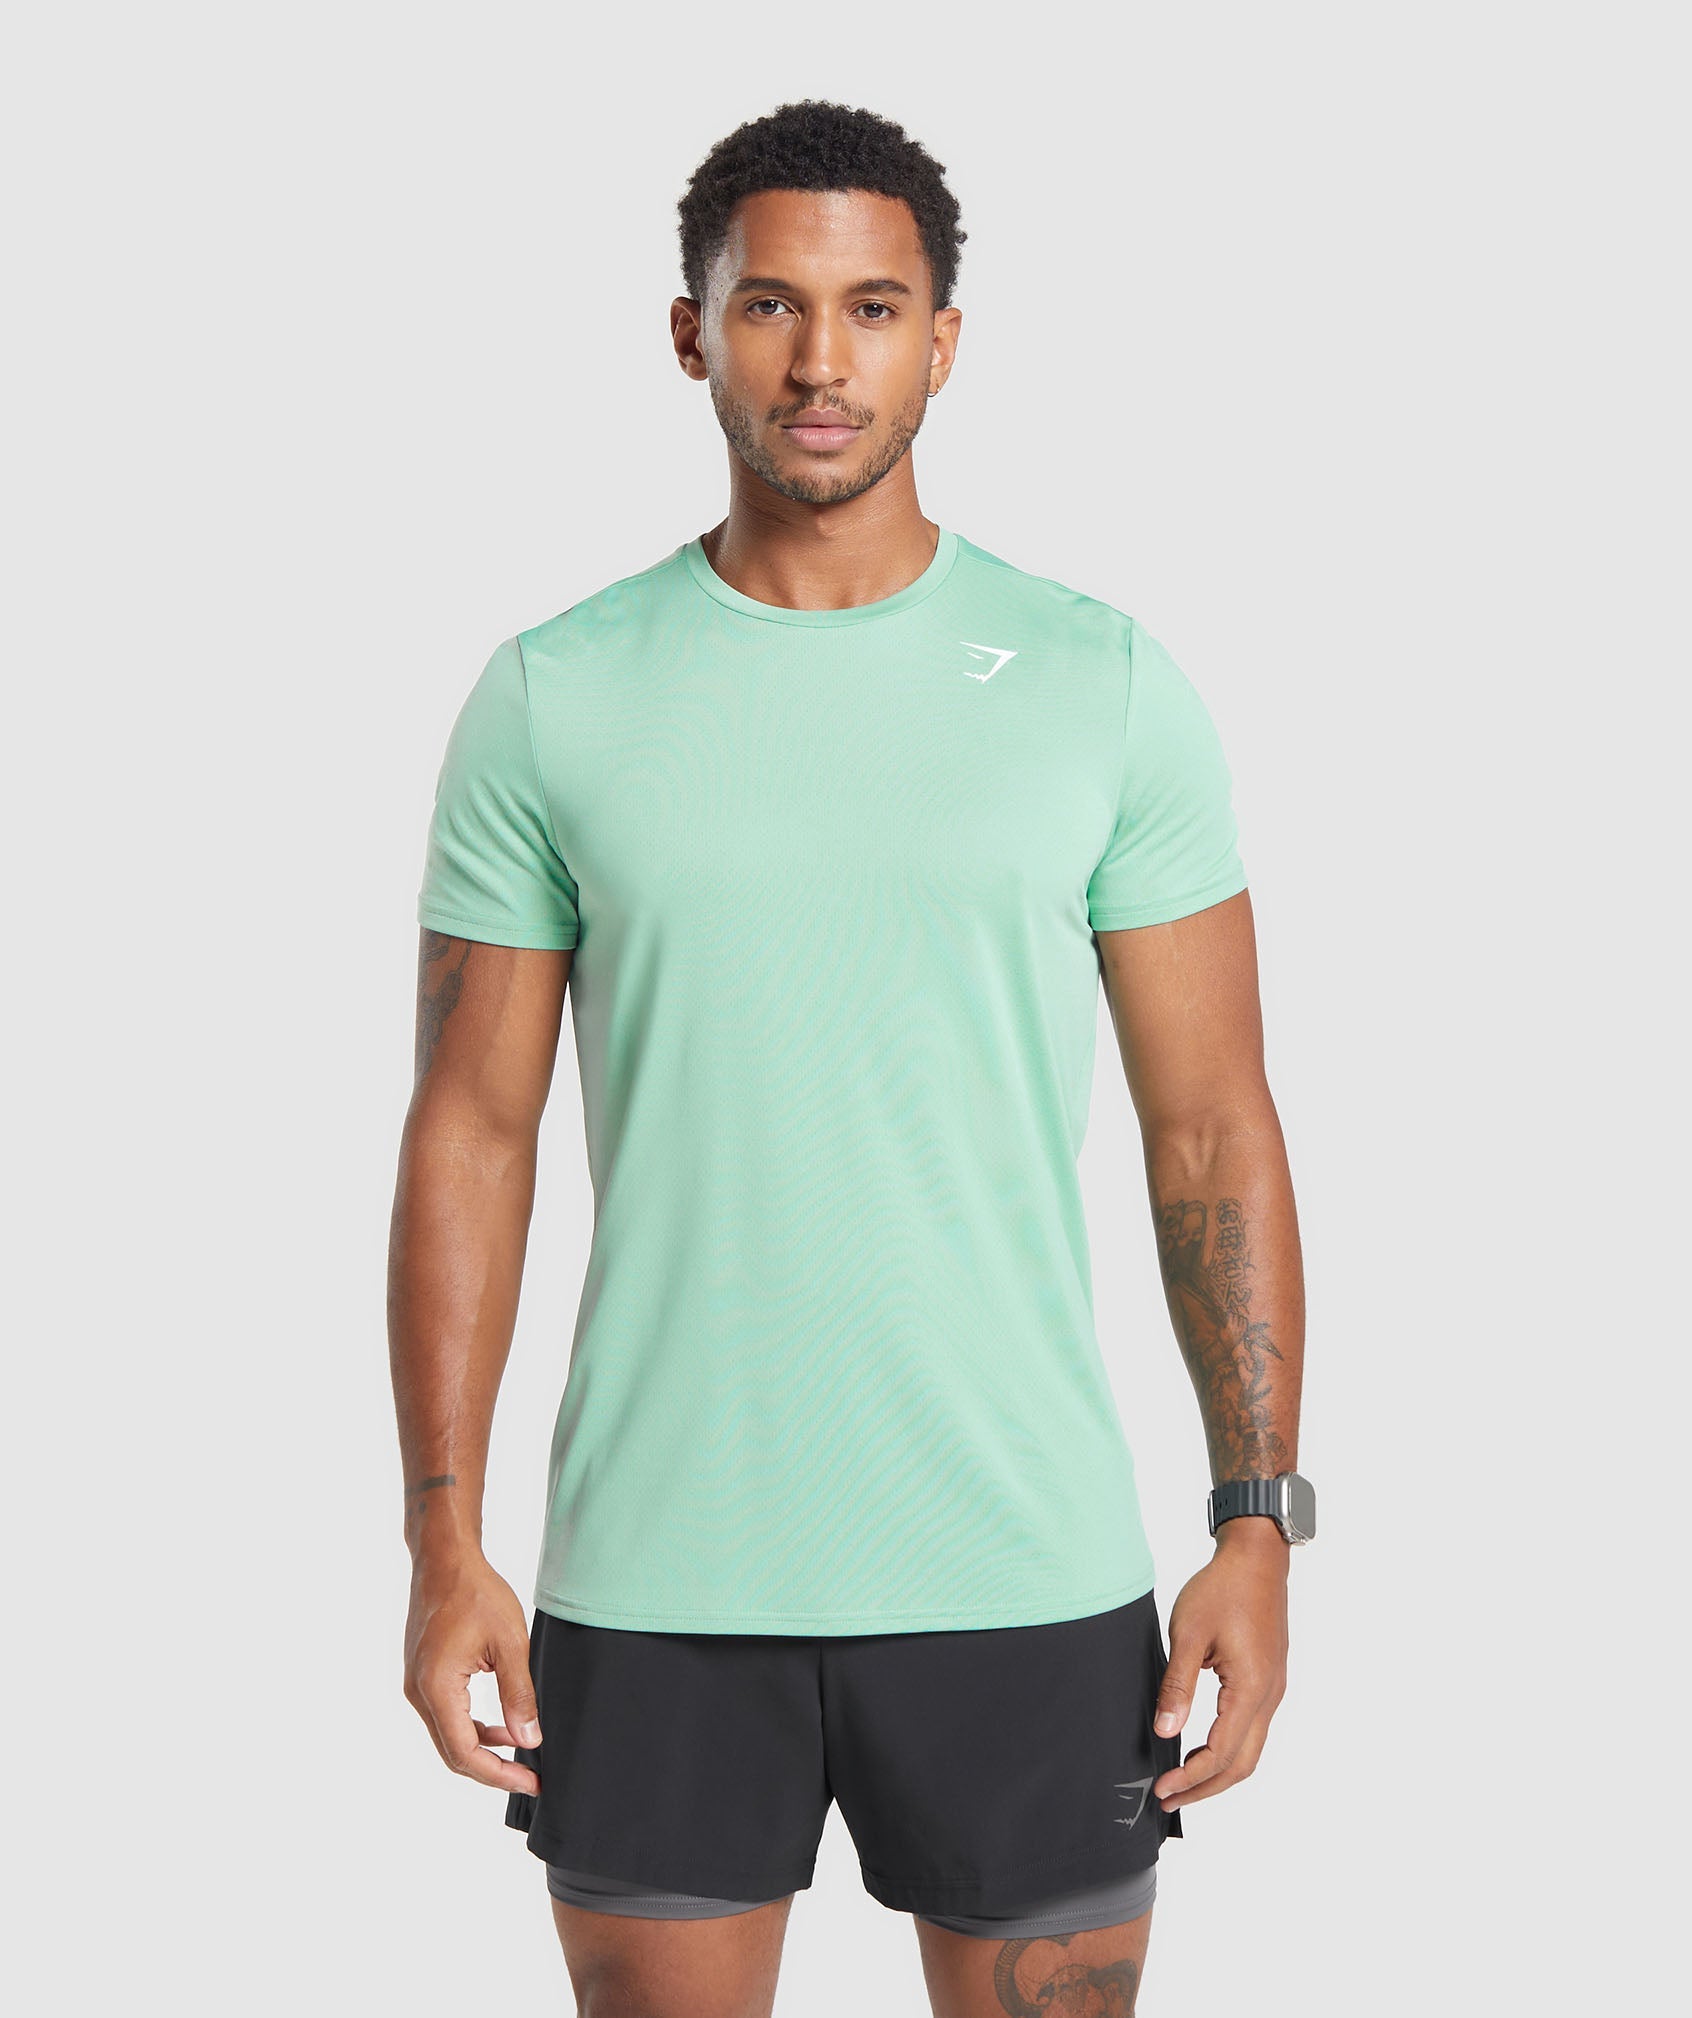 Arrival T-Shirt in Lido Green